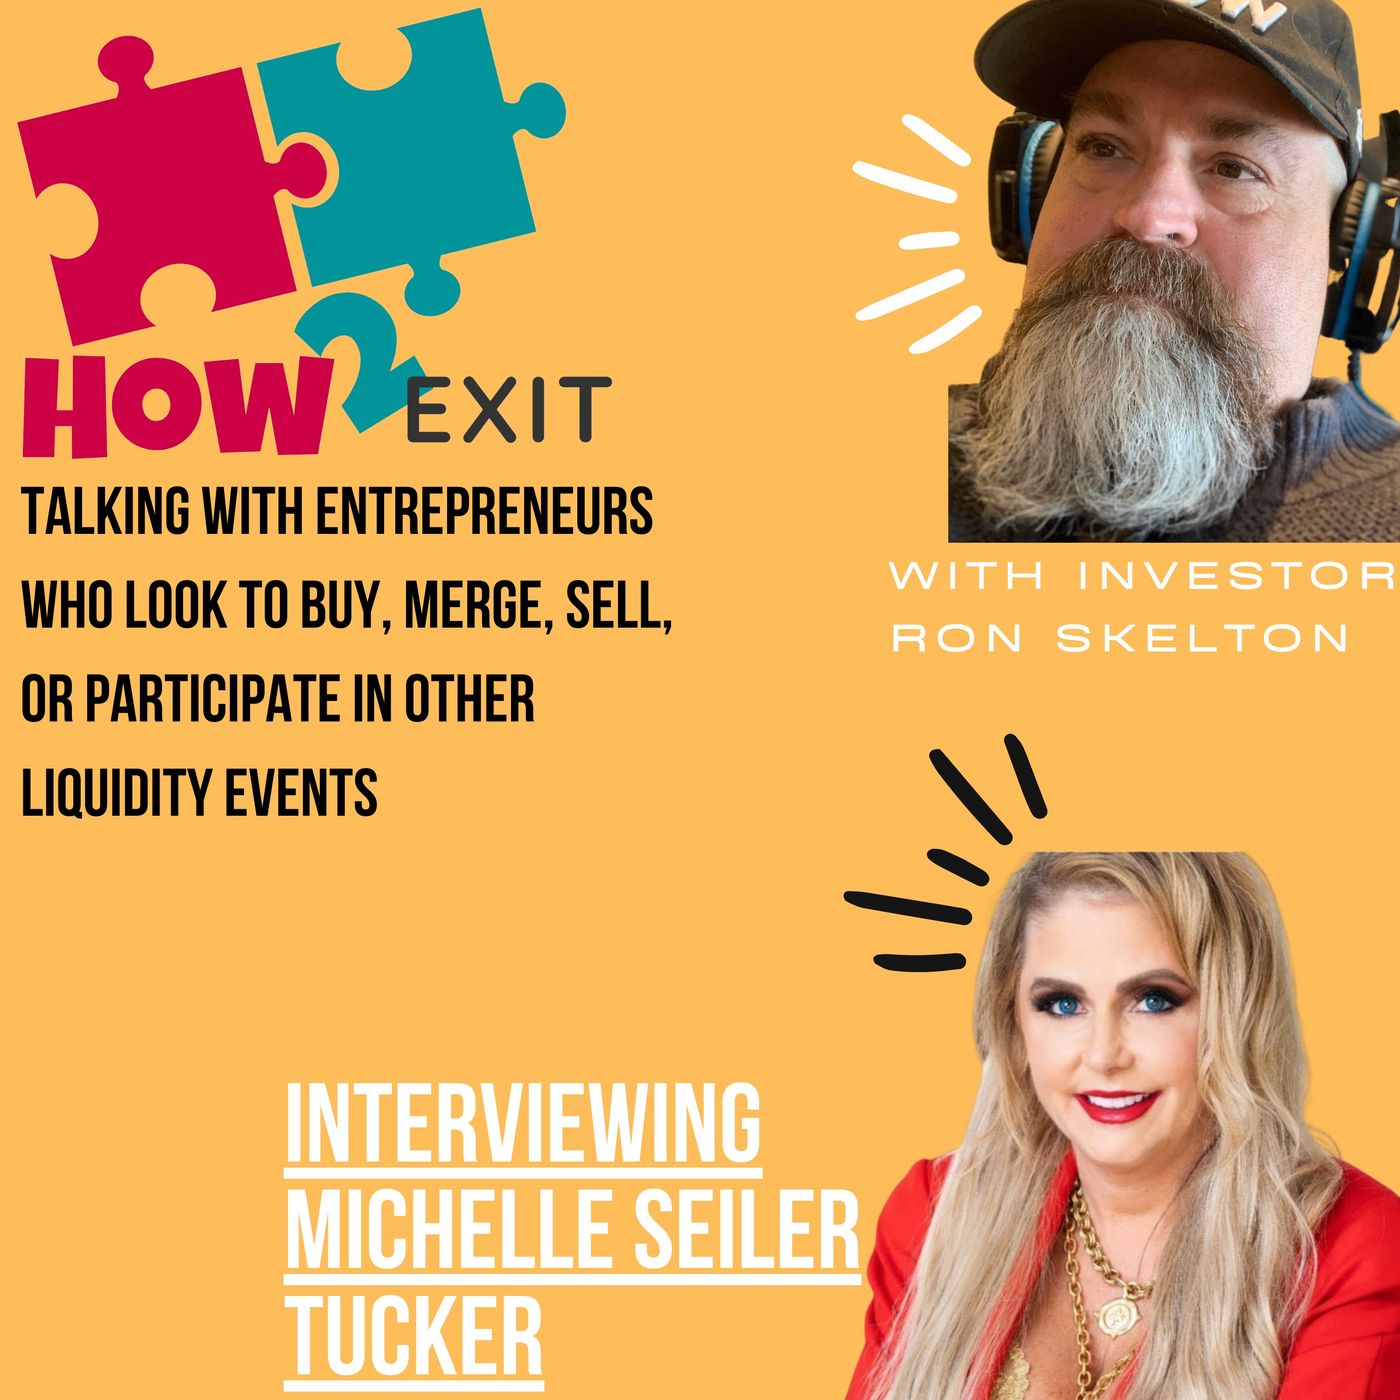 How2Exit Episode 50: Michelle Seiler Tucker - Founder and CEO of Seiler Tucker Incorporated. Image